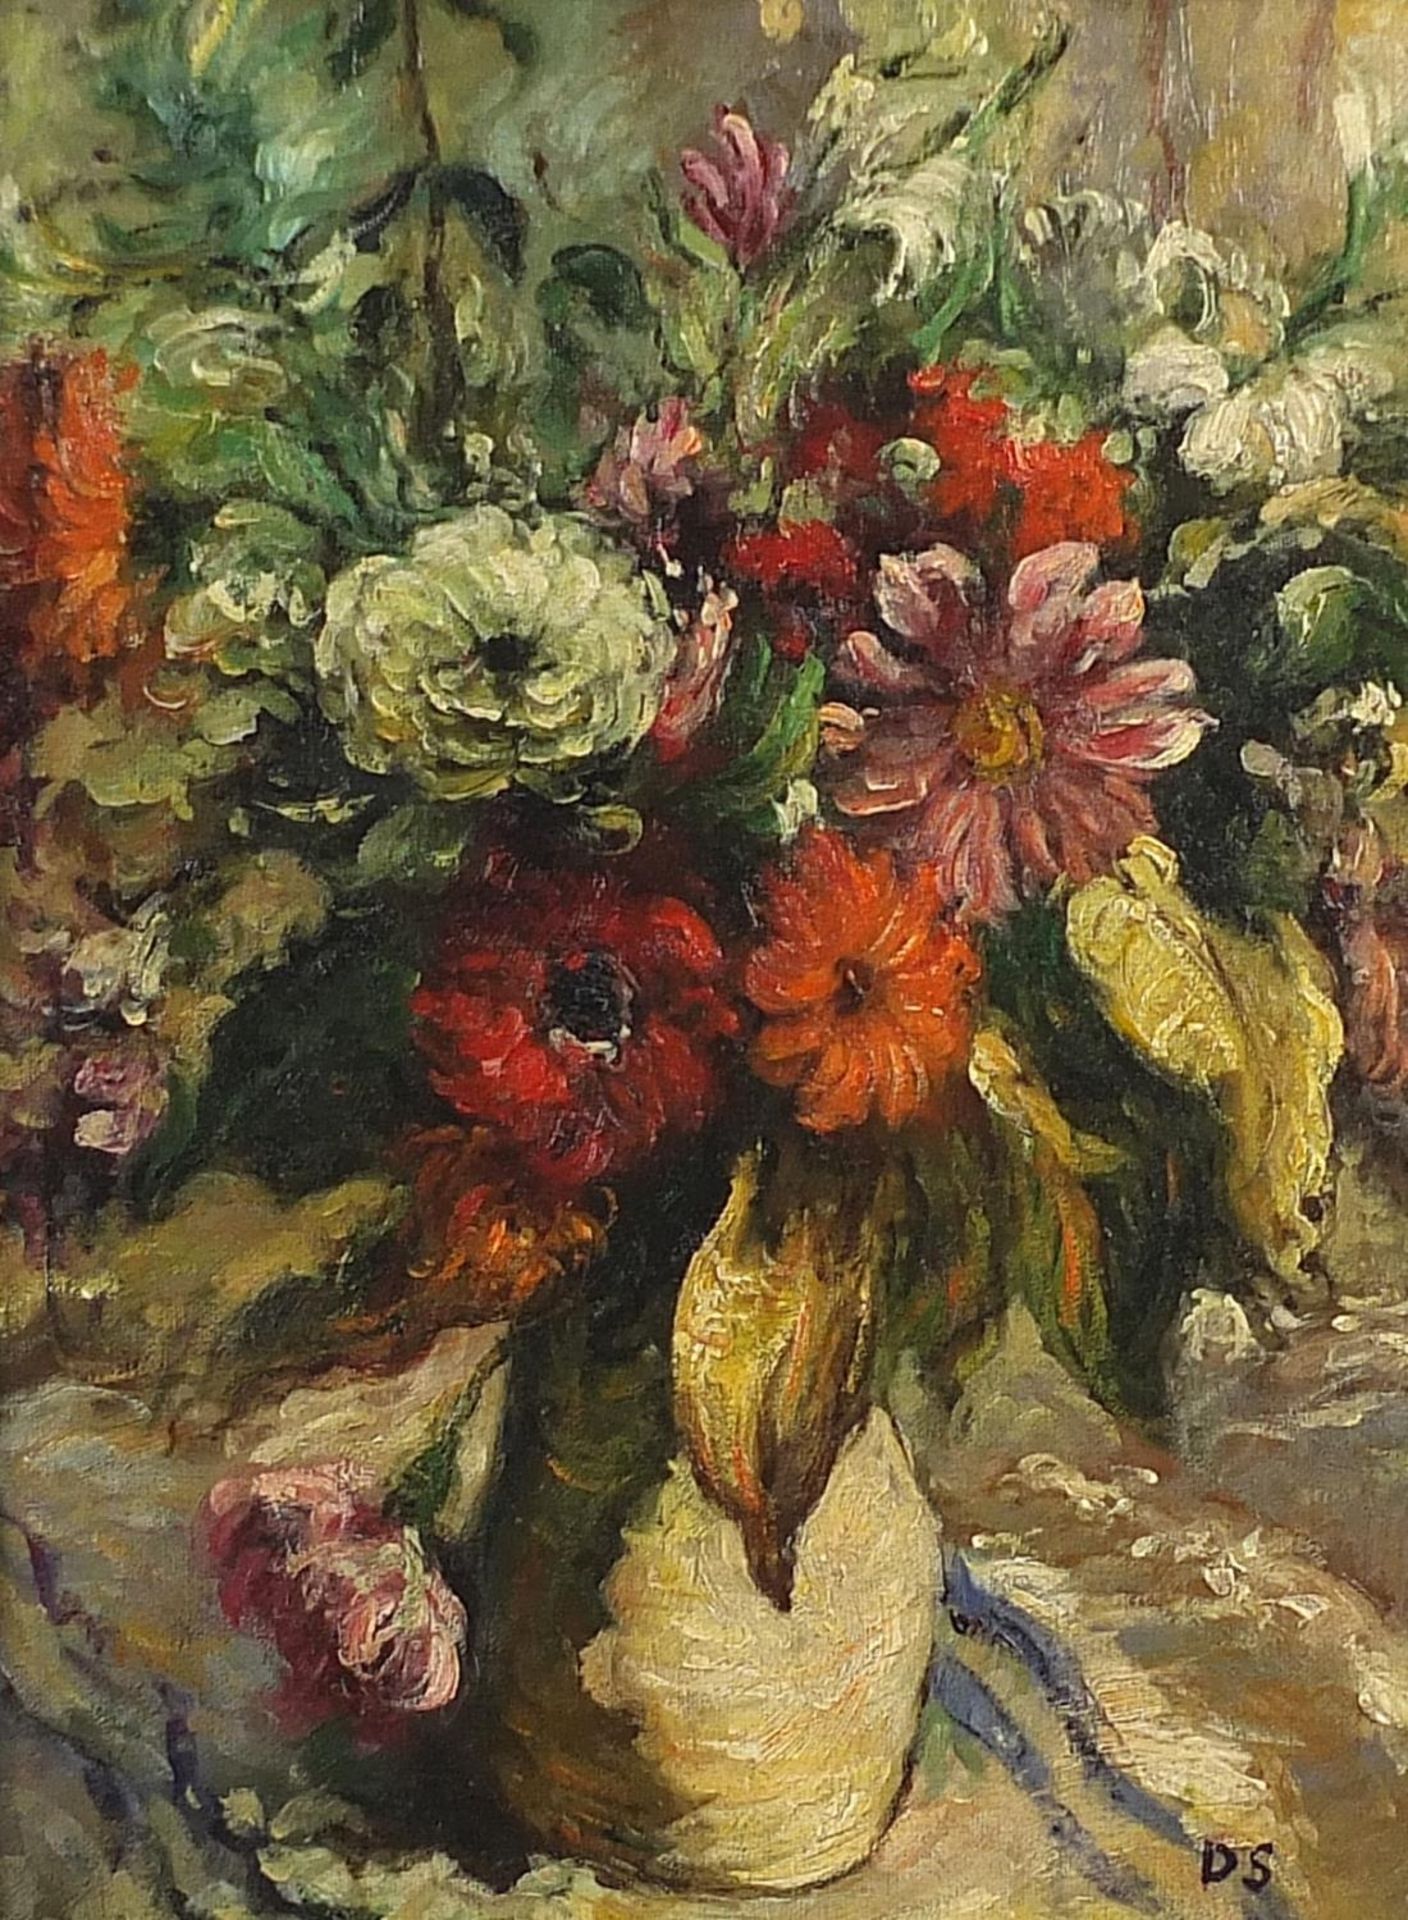 Still life flowers in a vase, Modern British oil on board, mounted and framed, 39.5cm x 29.5cm